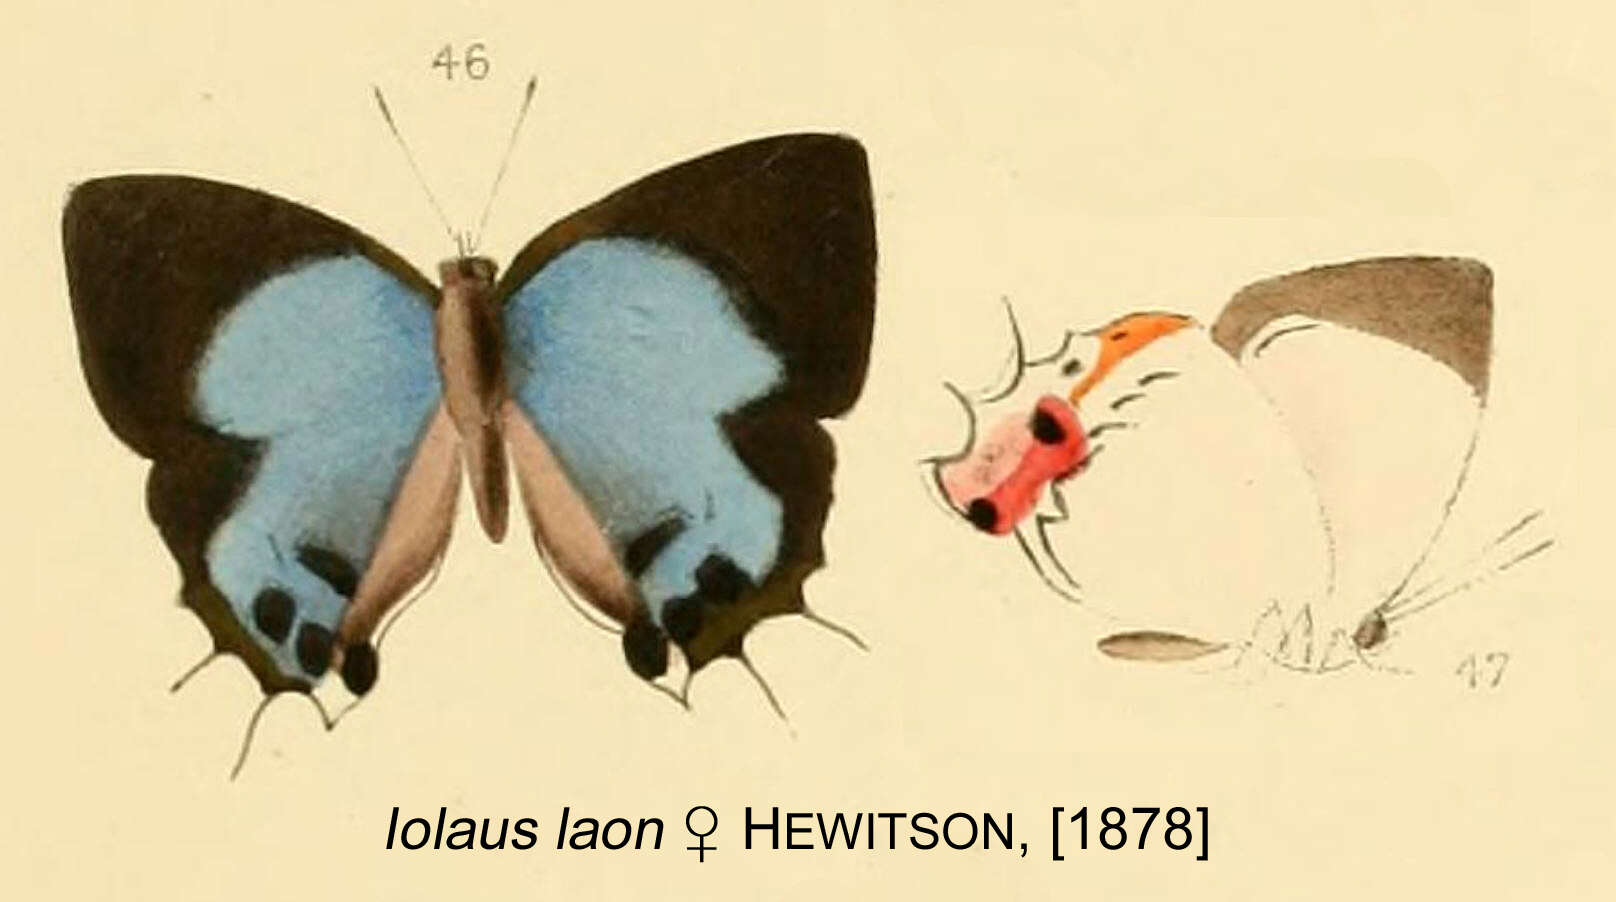 Image of Iolaus laon